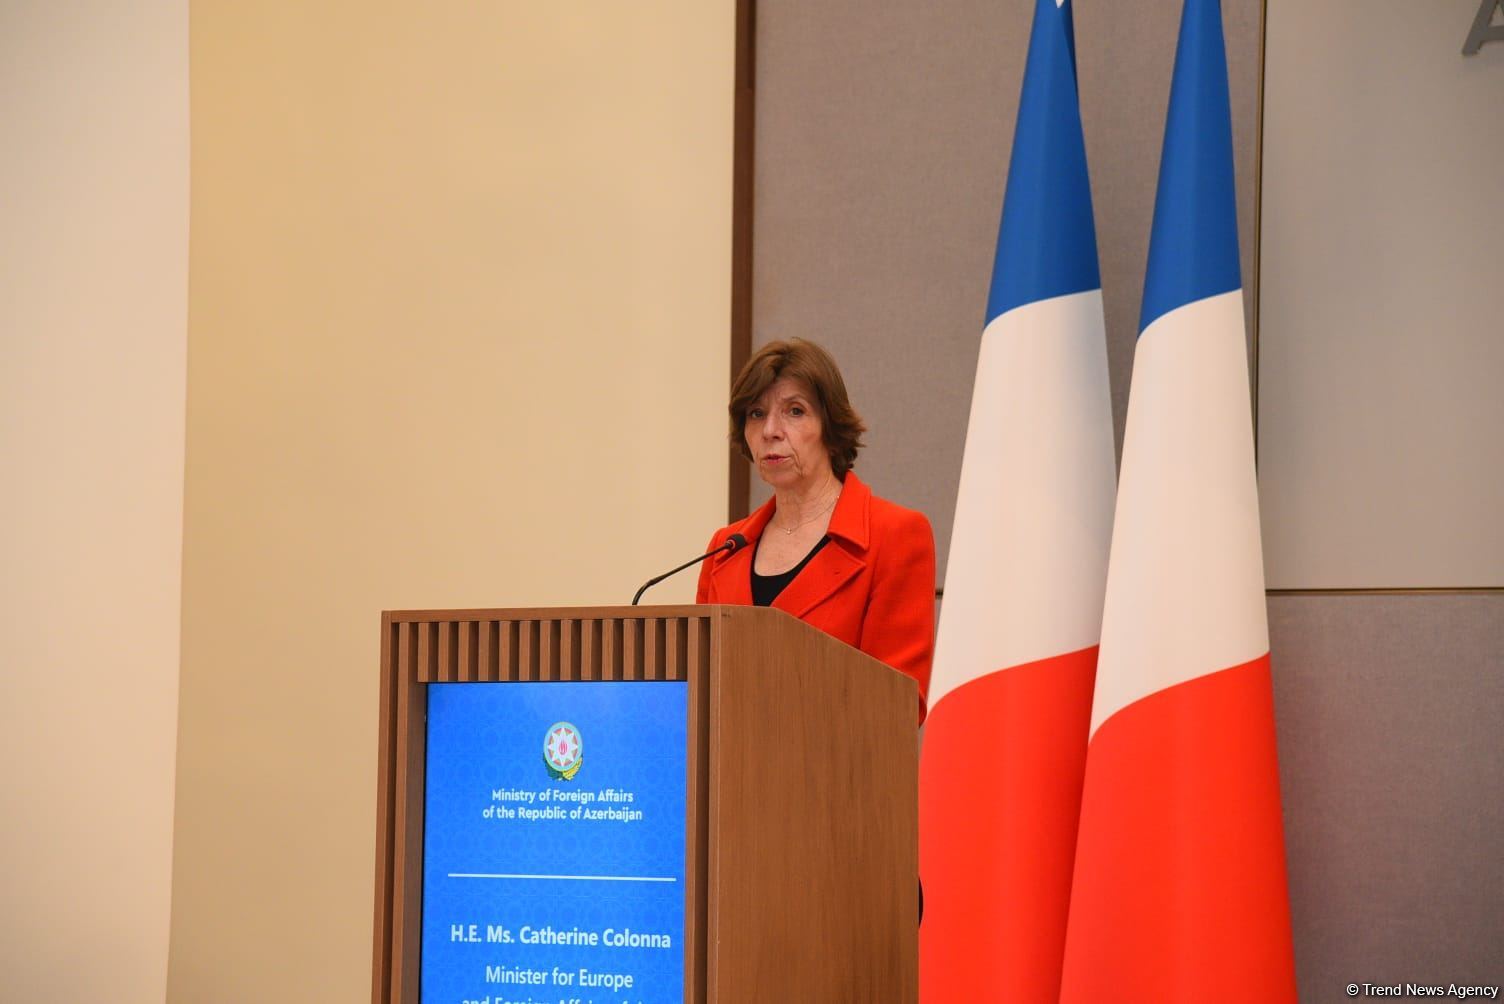 France welcomes Azerbaijan's proposal on peace agreement with Armenia - FM